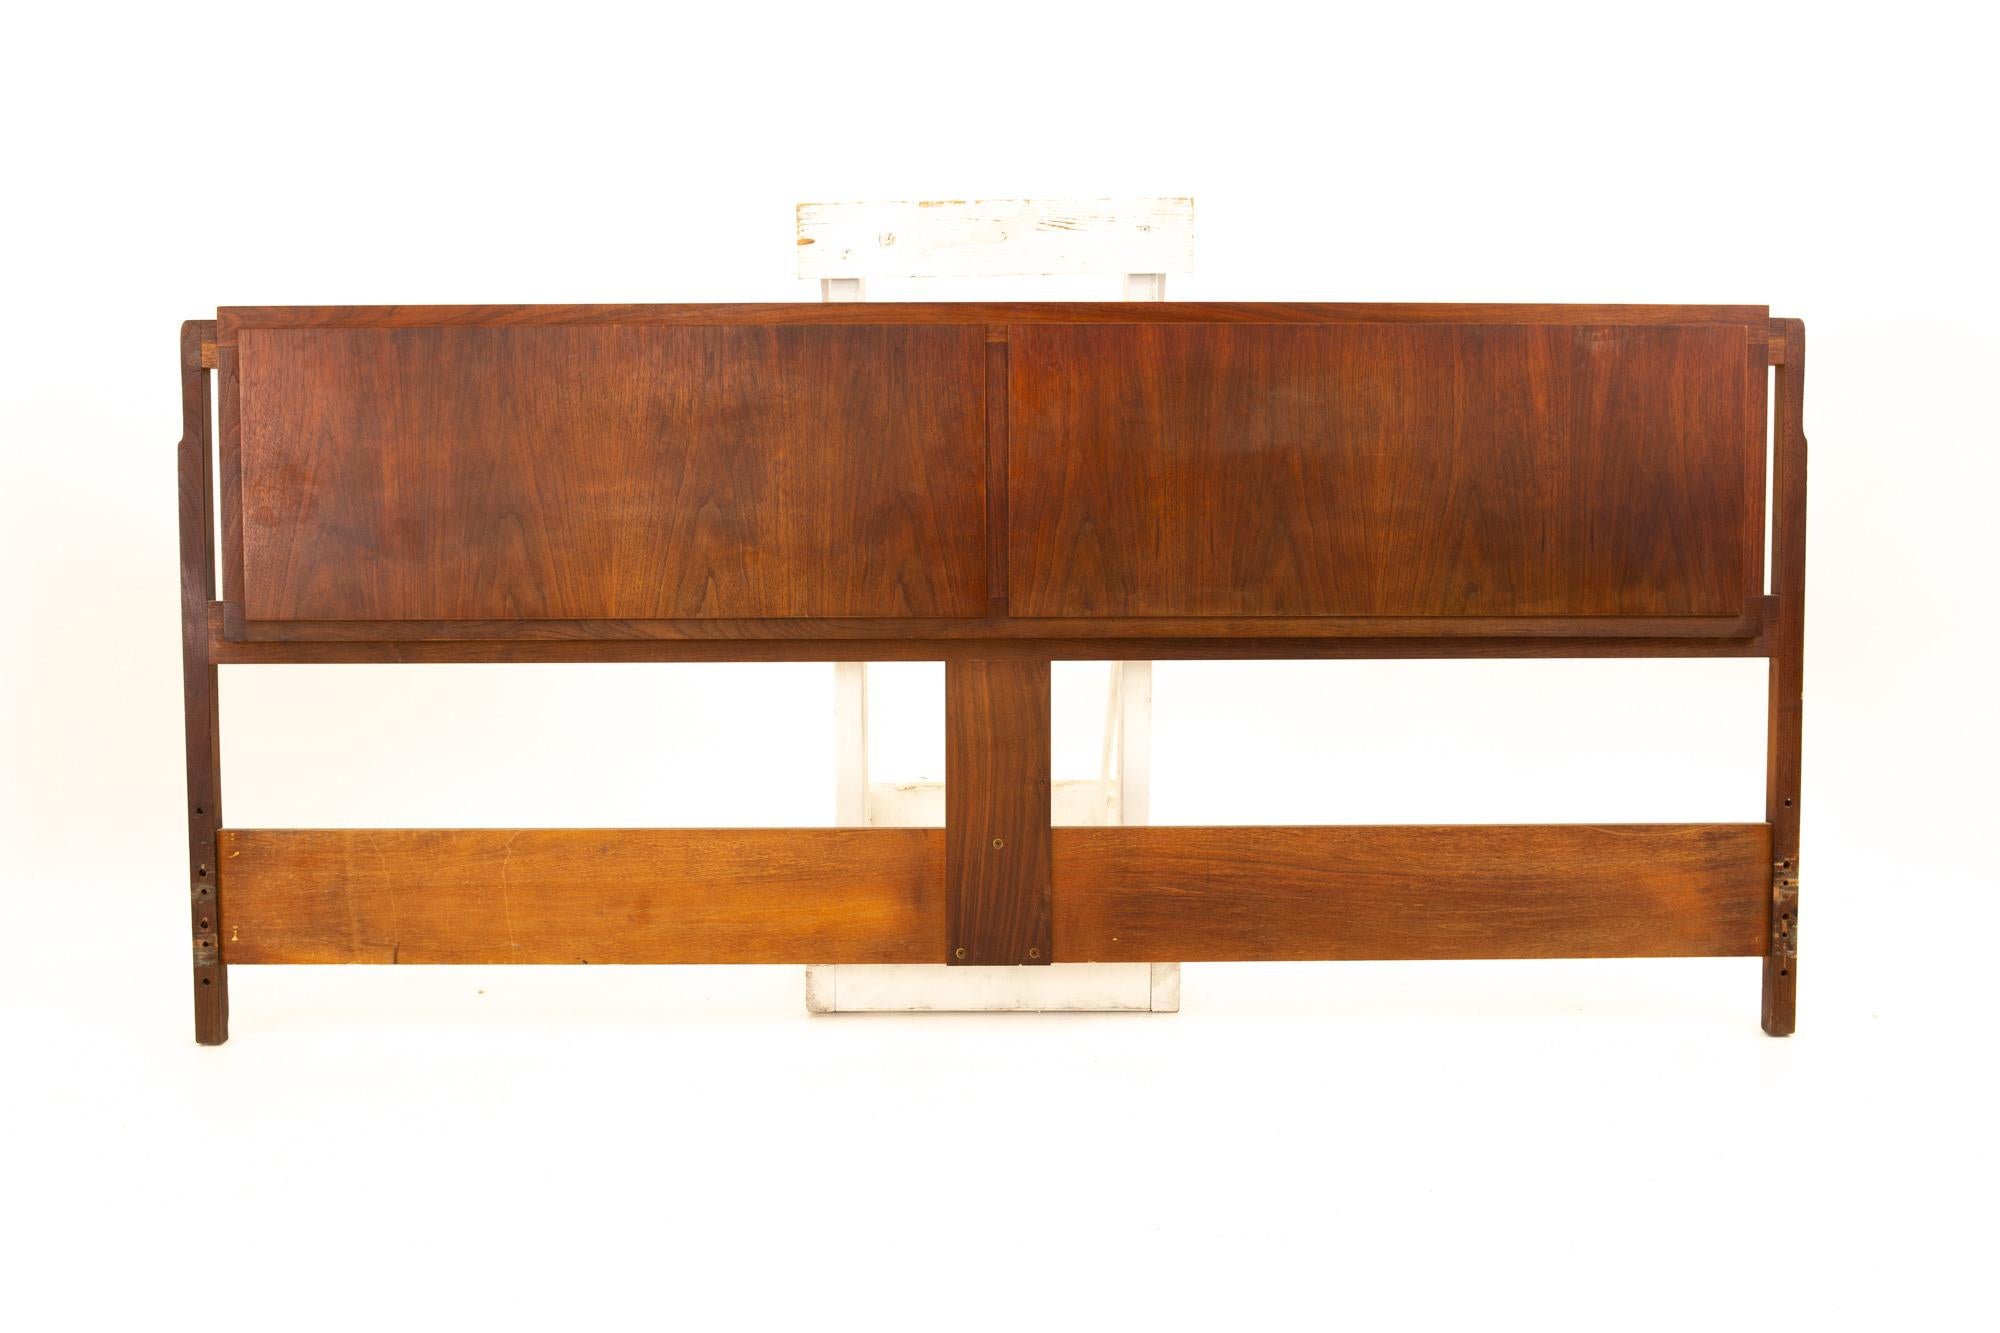 Jack Cartwright for founders midcentury walnut King headboard
Headboard measures: 77.25 wide x 2.25 deep x 35.25 high

All pieces of furniture can be had in what we call restored vintage condition. That means the piece is restored upon purchase